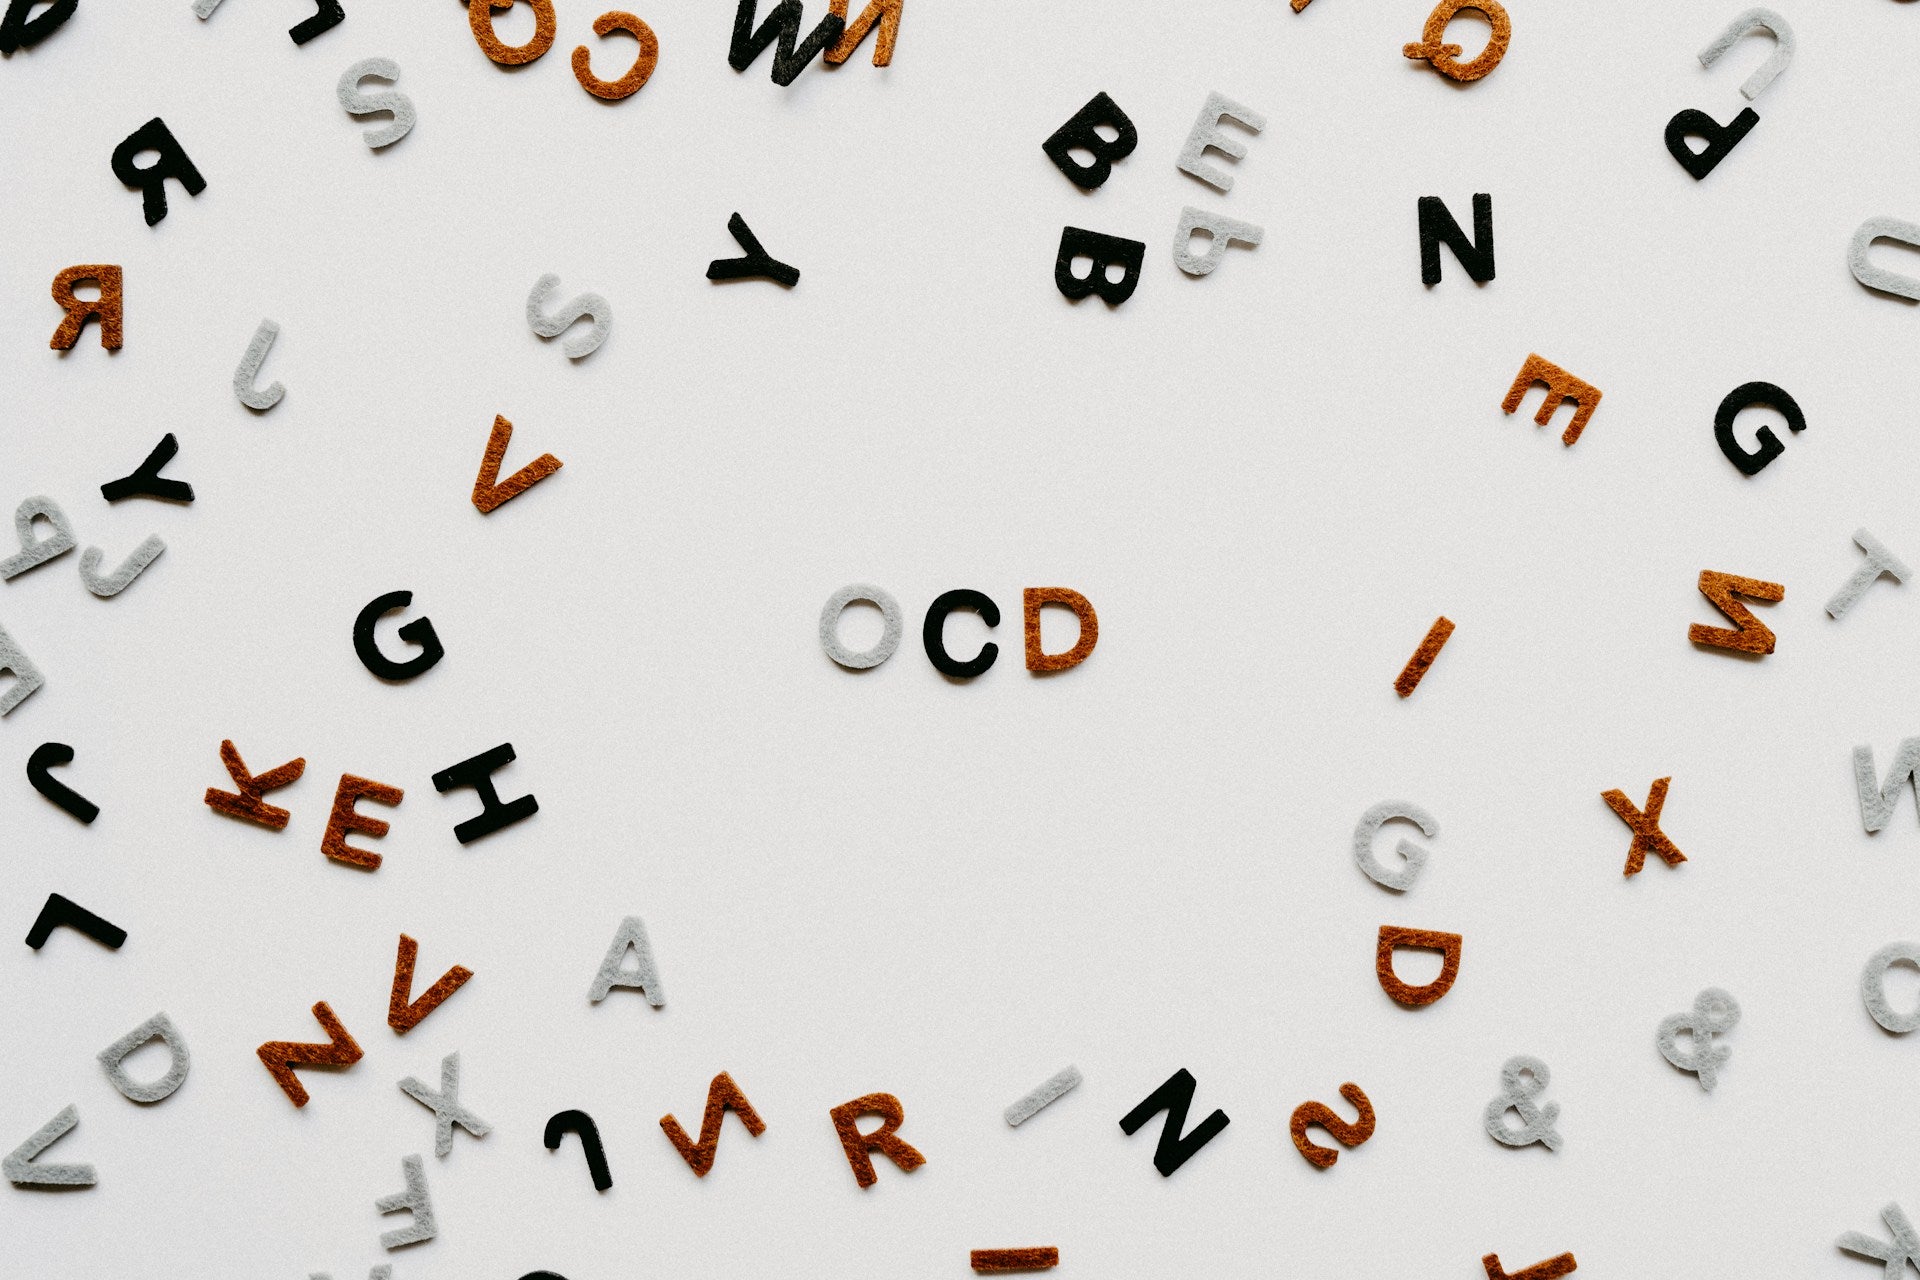 OCD with letters